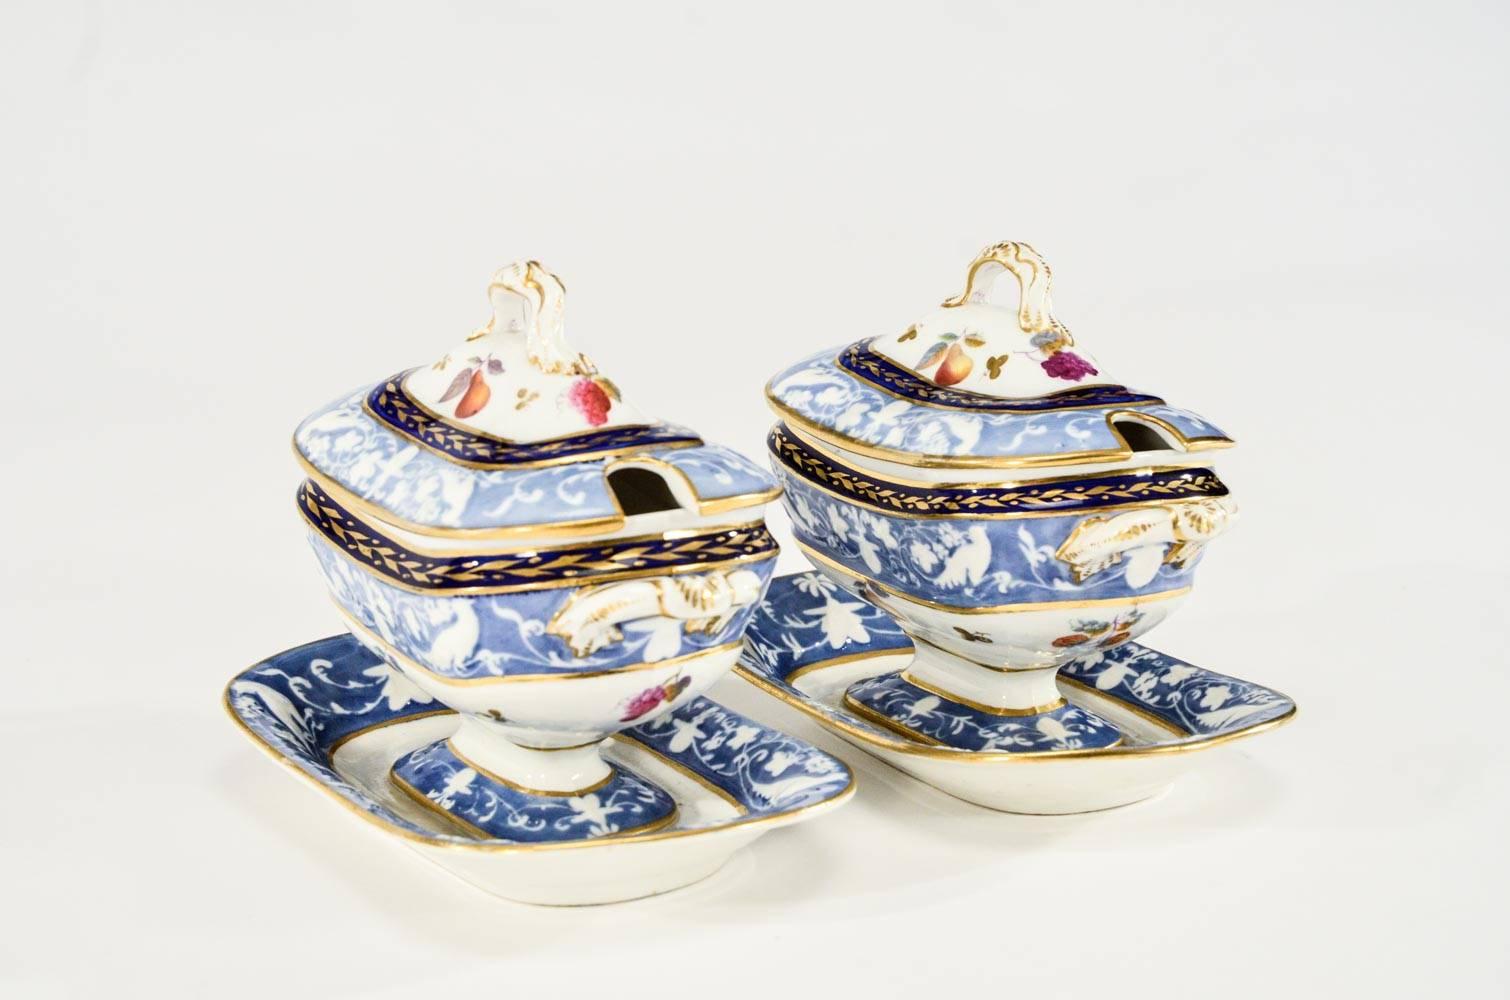 Pair of 19th Century Hand-Painted Spode Sauce Tureens For Sale 4